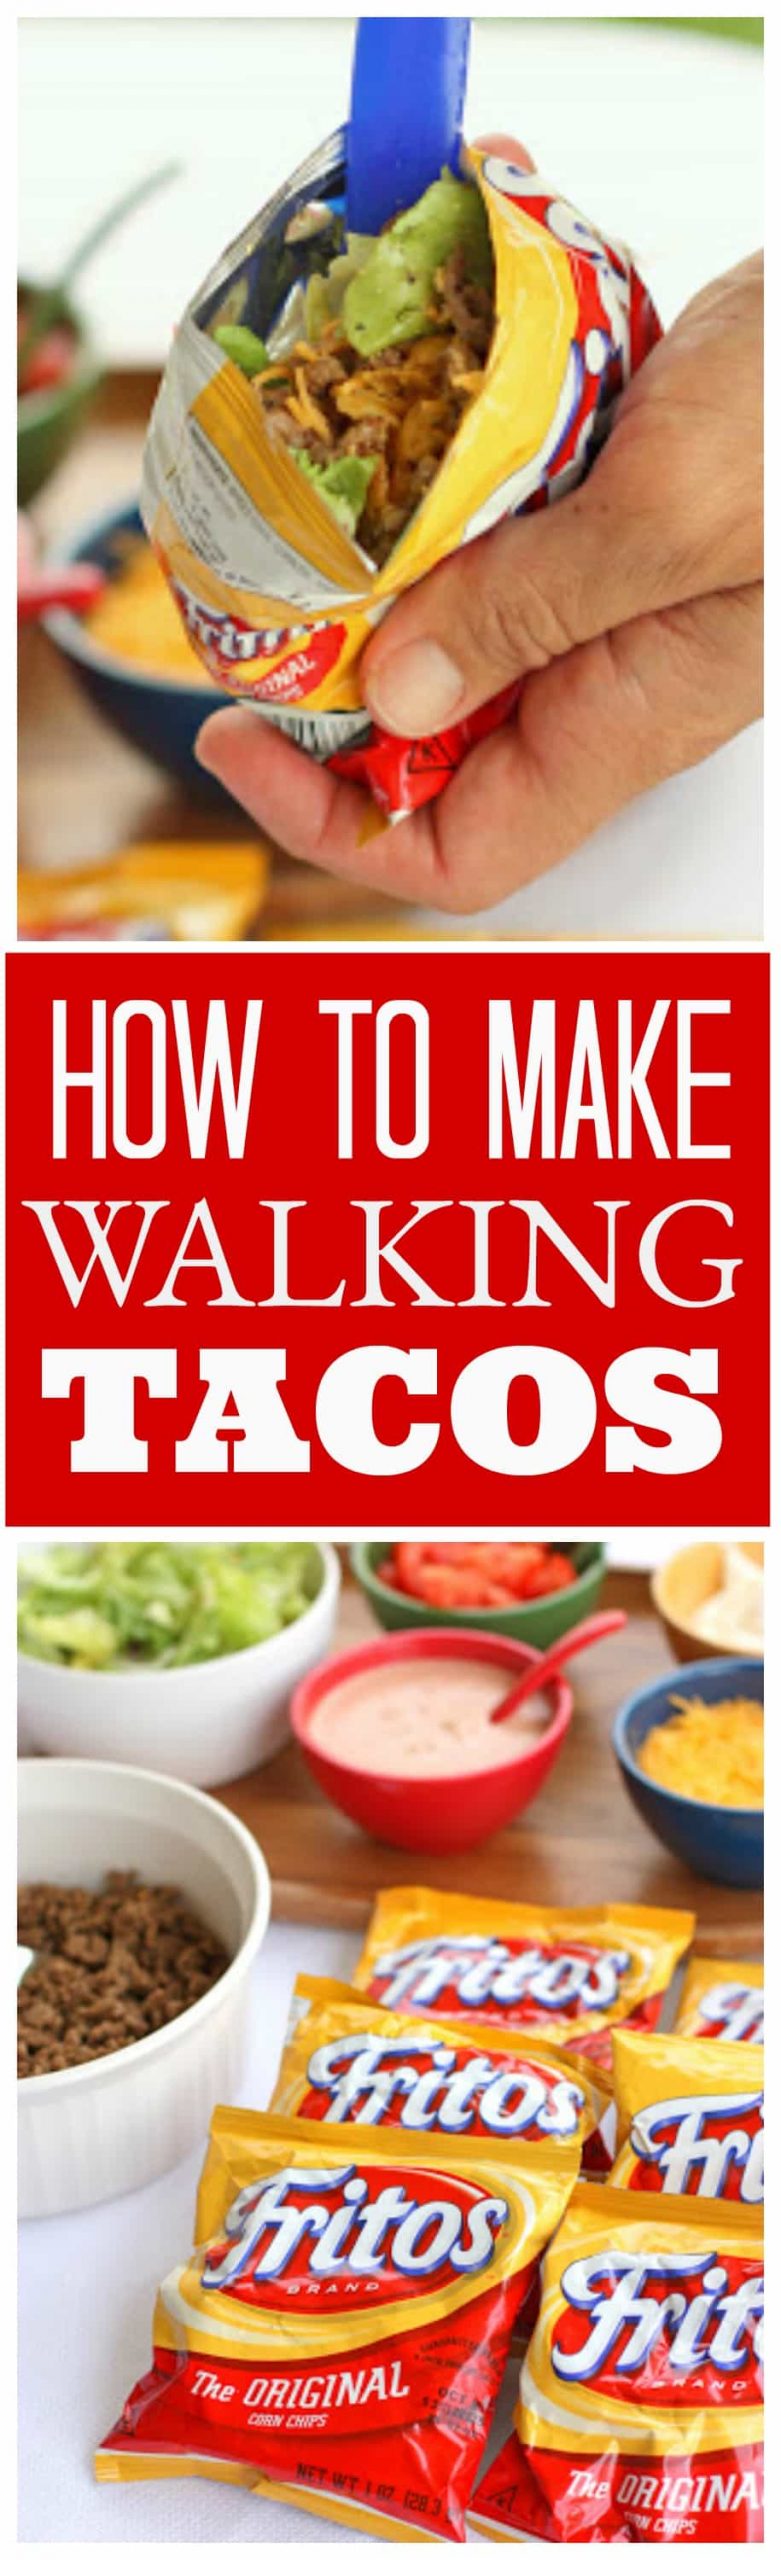 These Walking Tacos are tacos made right in the bag. Great for parties and potlucks! #walking #tacos #dinner #recipe #potluck